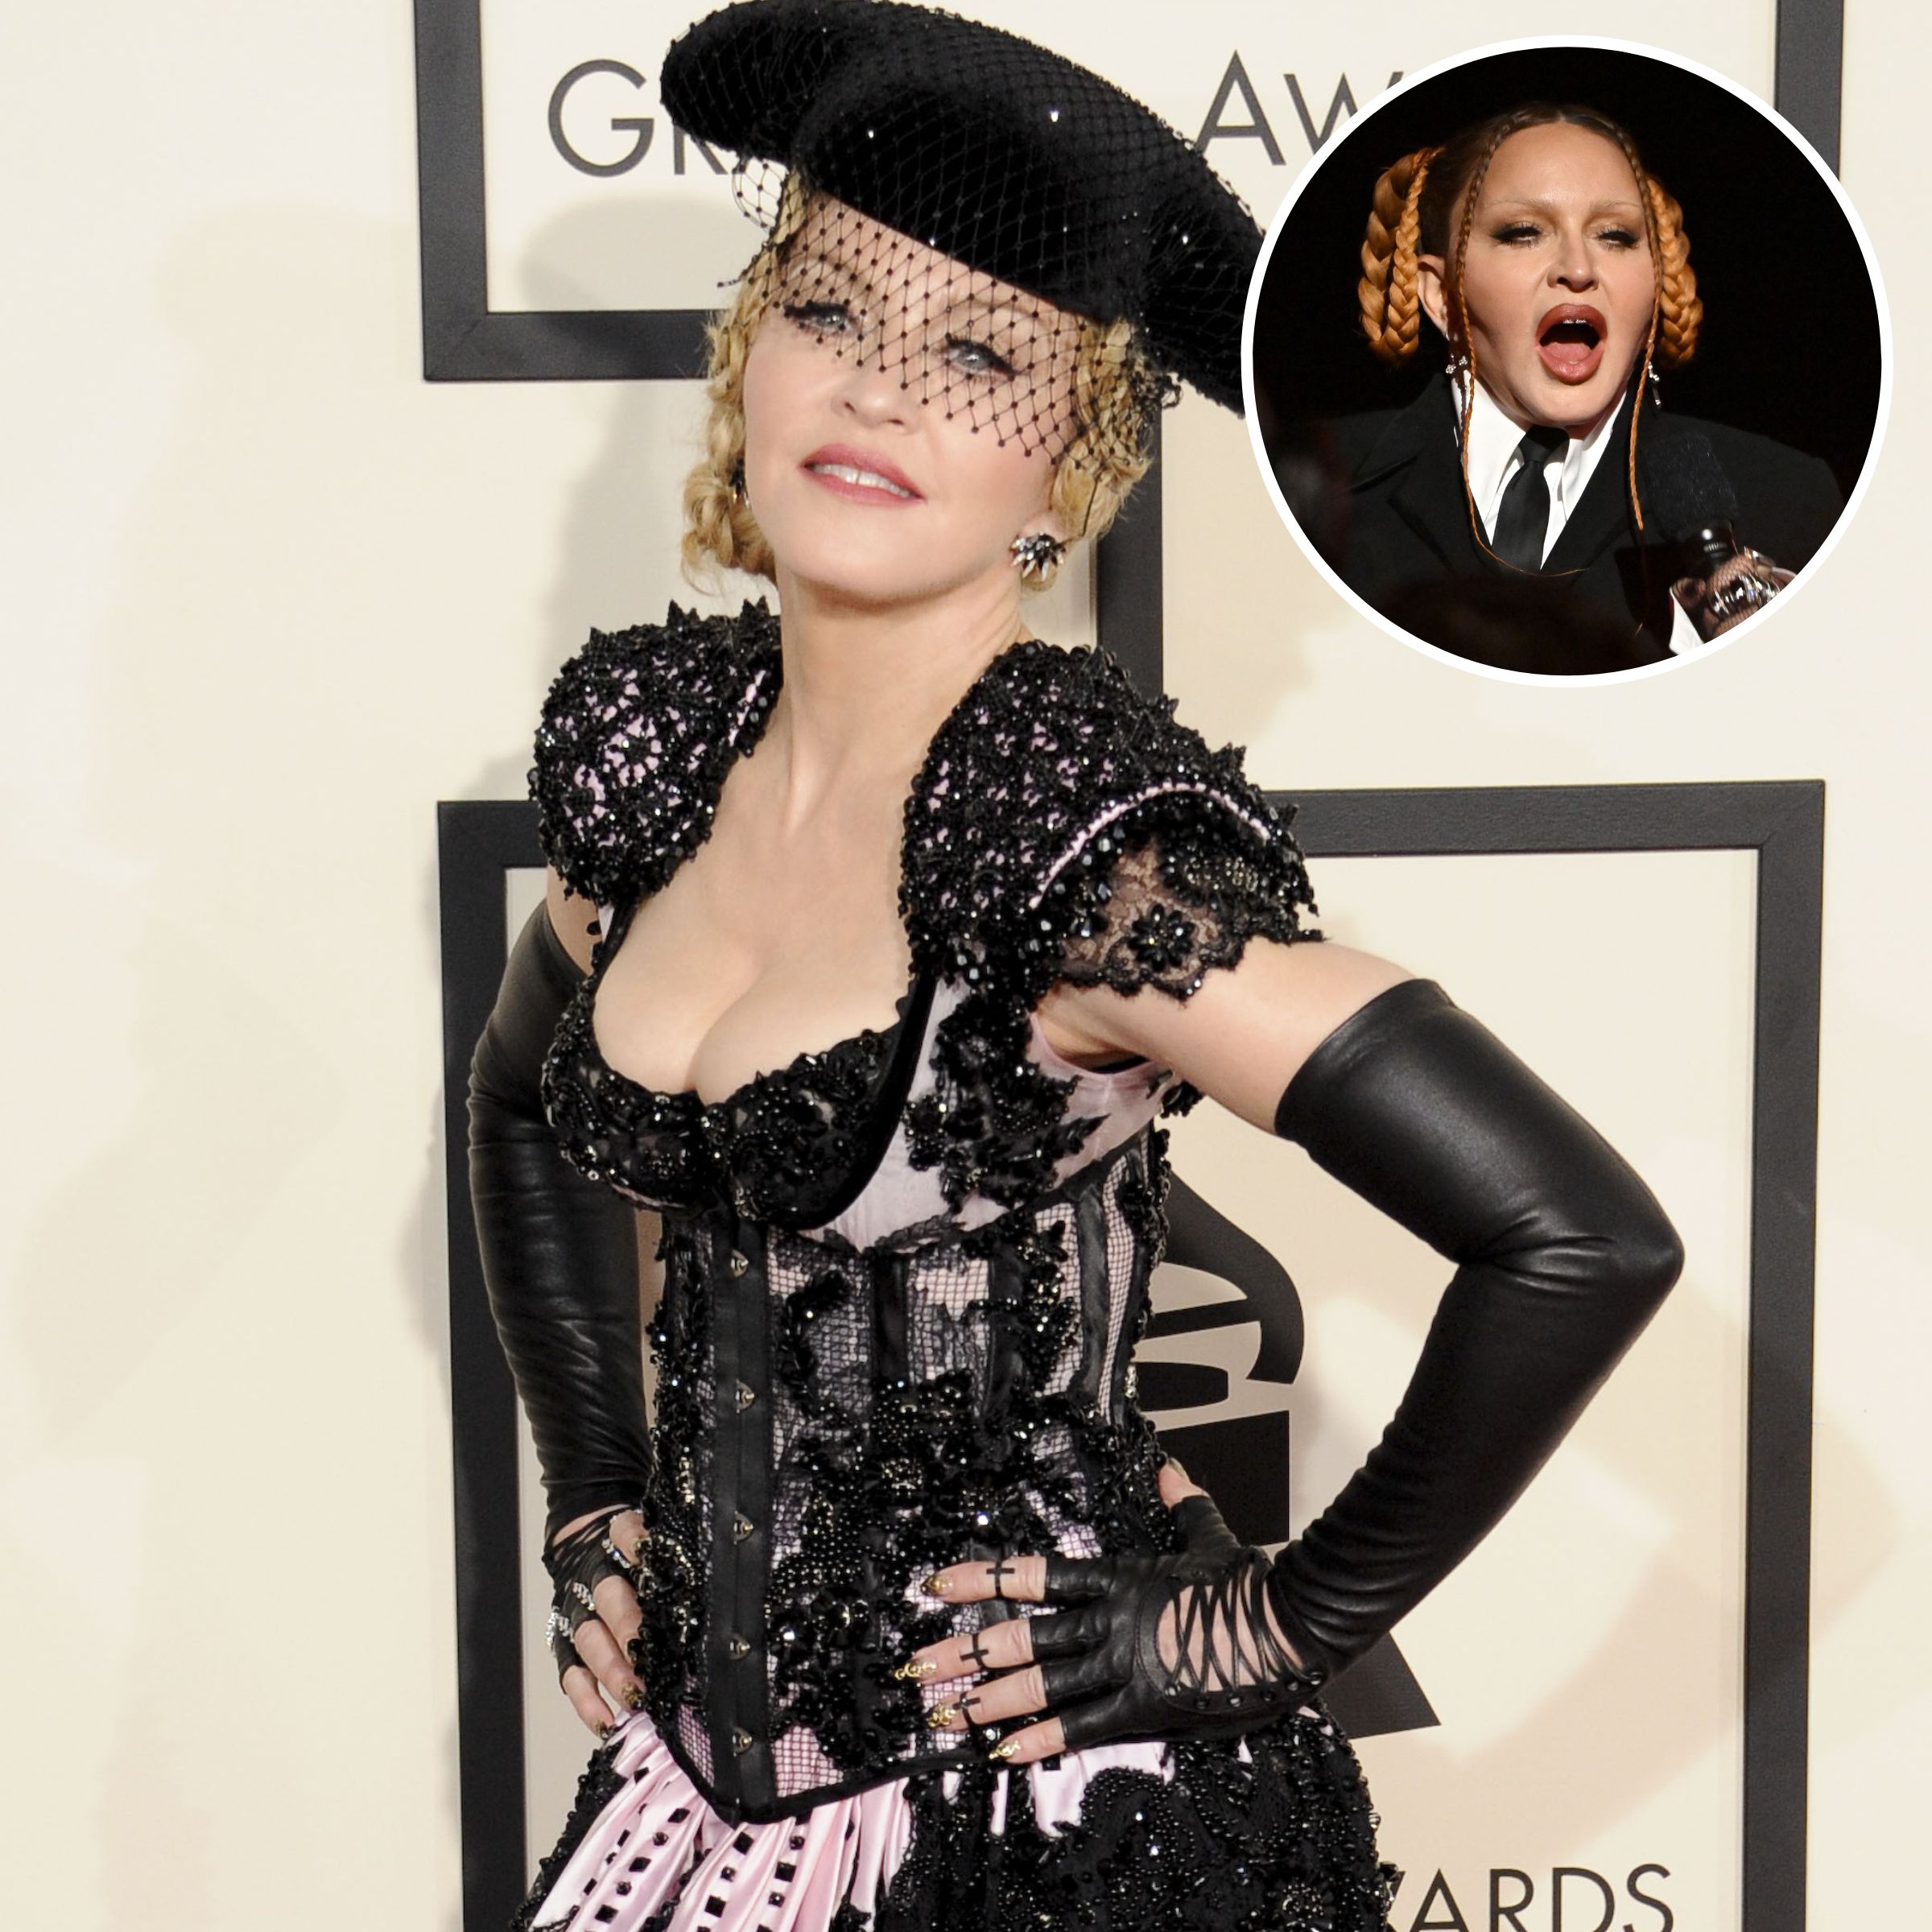 https://www.lifeandstylemag.com/wp-content/uploads/2023/02/Madonna-Slams-Plastic-Surgery-Rumors-See-the-Material-Girls-Transformation-From-the-80s-to-Today.jpg?fit=2400%2C2400&quality=86&strip=all